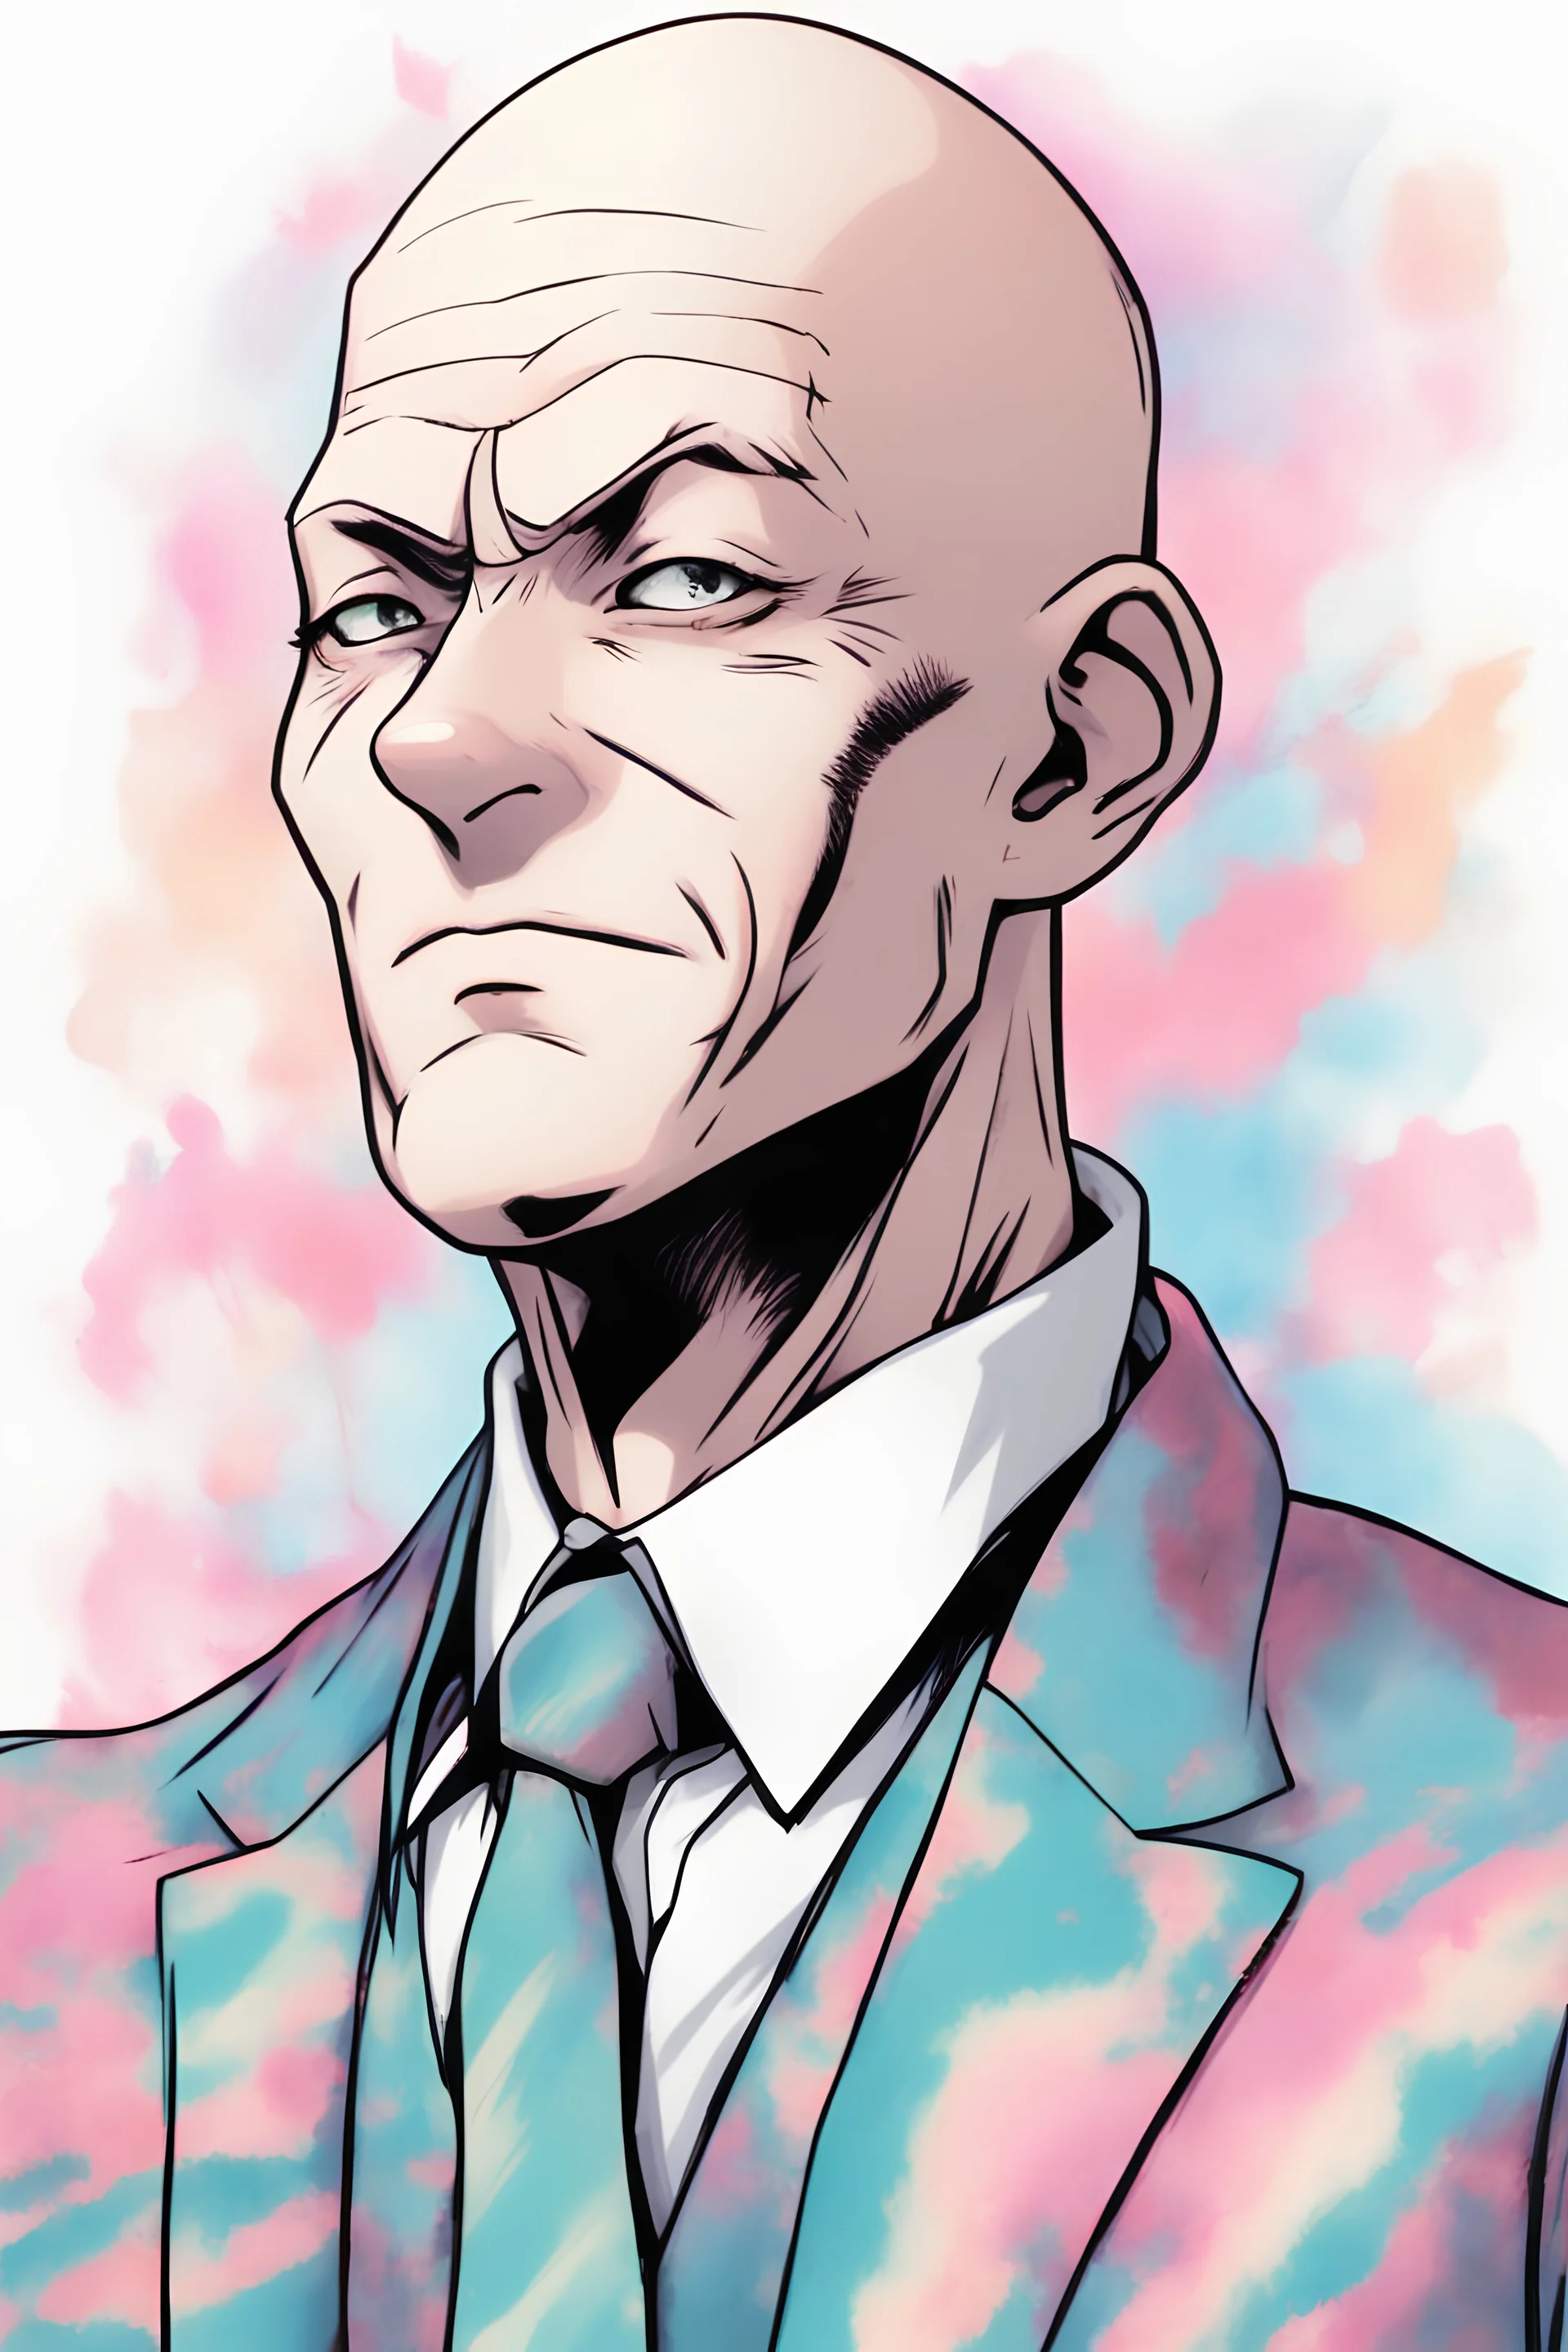 Bald Man with a feminine face, long nose, makeup, tie-dye unitard, drawn in the "My Hero Academia" art style.